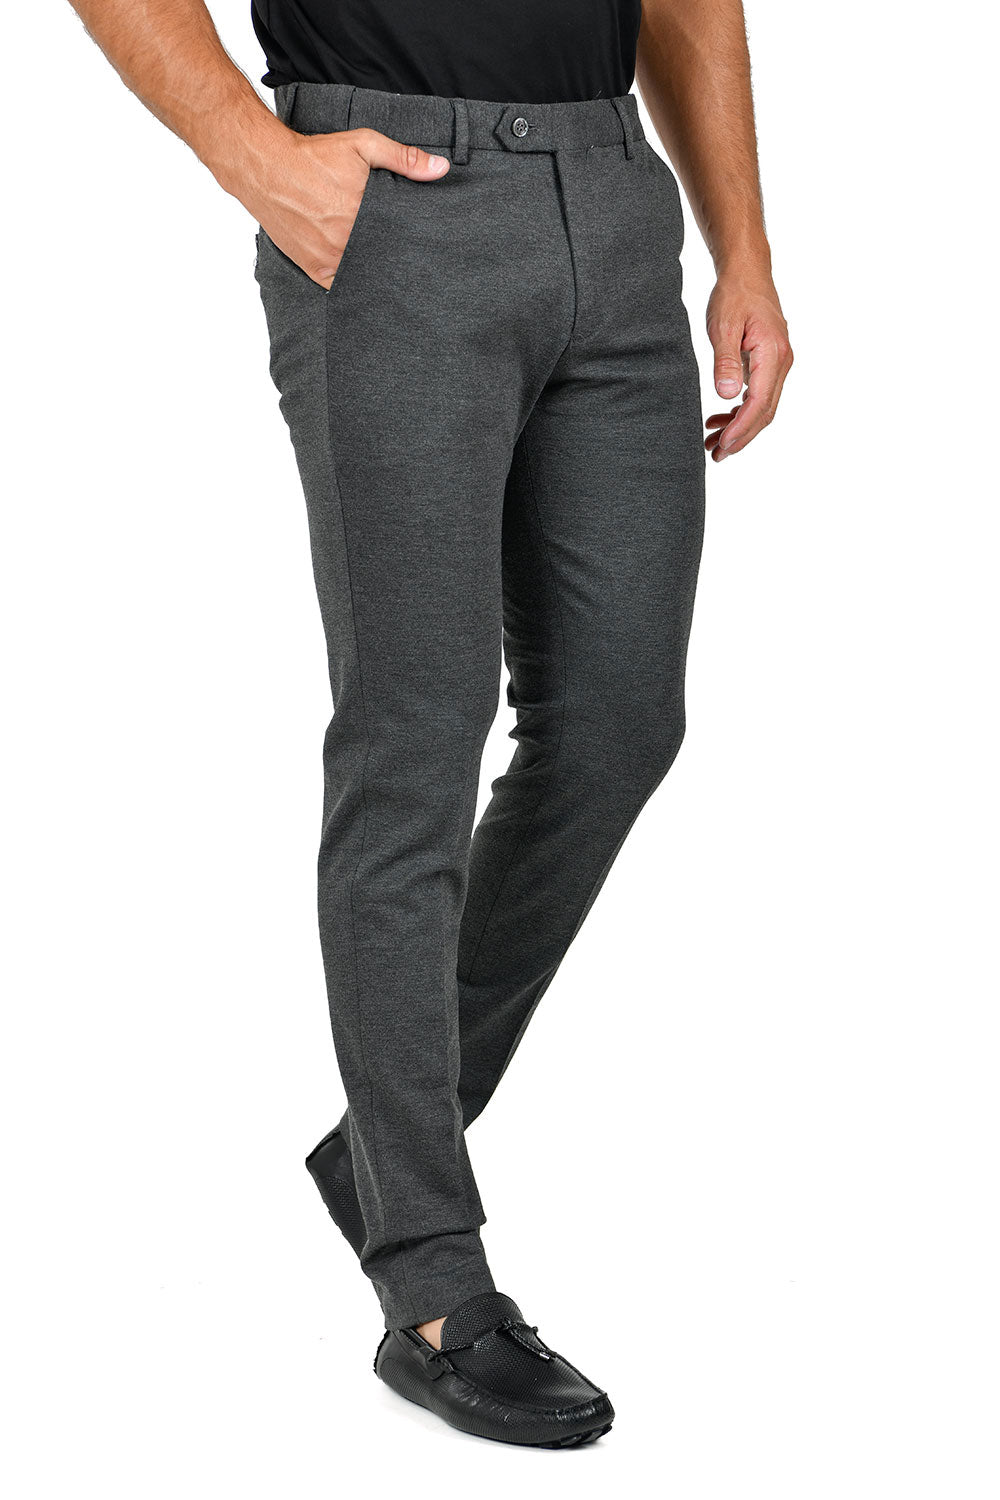 Barabas Men's Solid Color Basic Essential Chino Dress Pants CP4007 Charcoal 